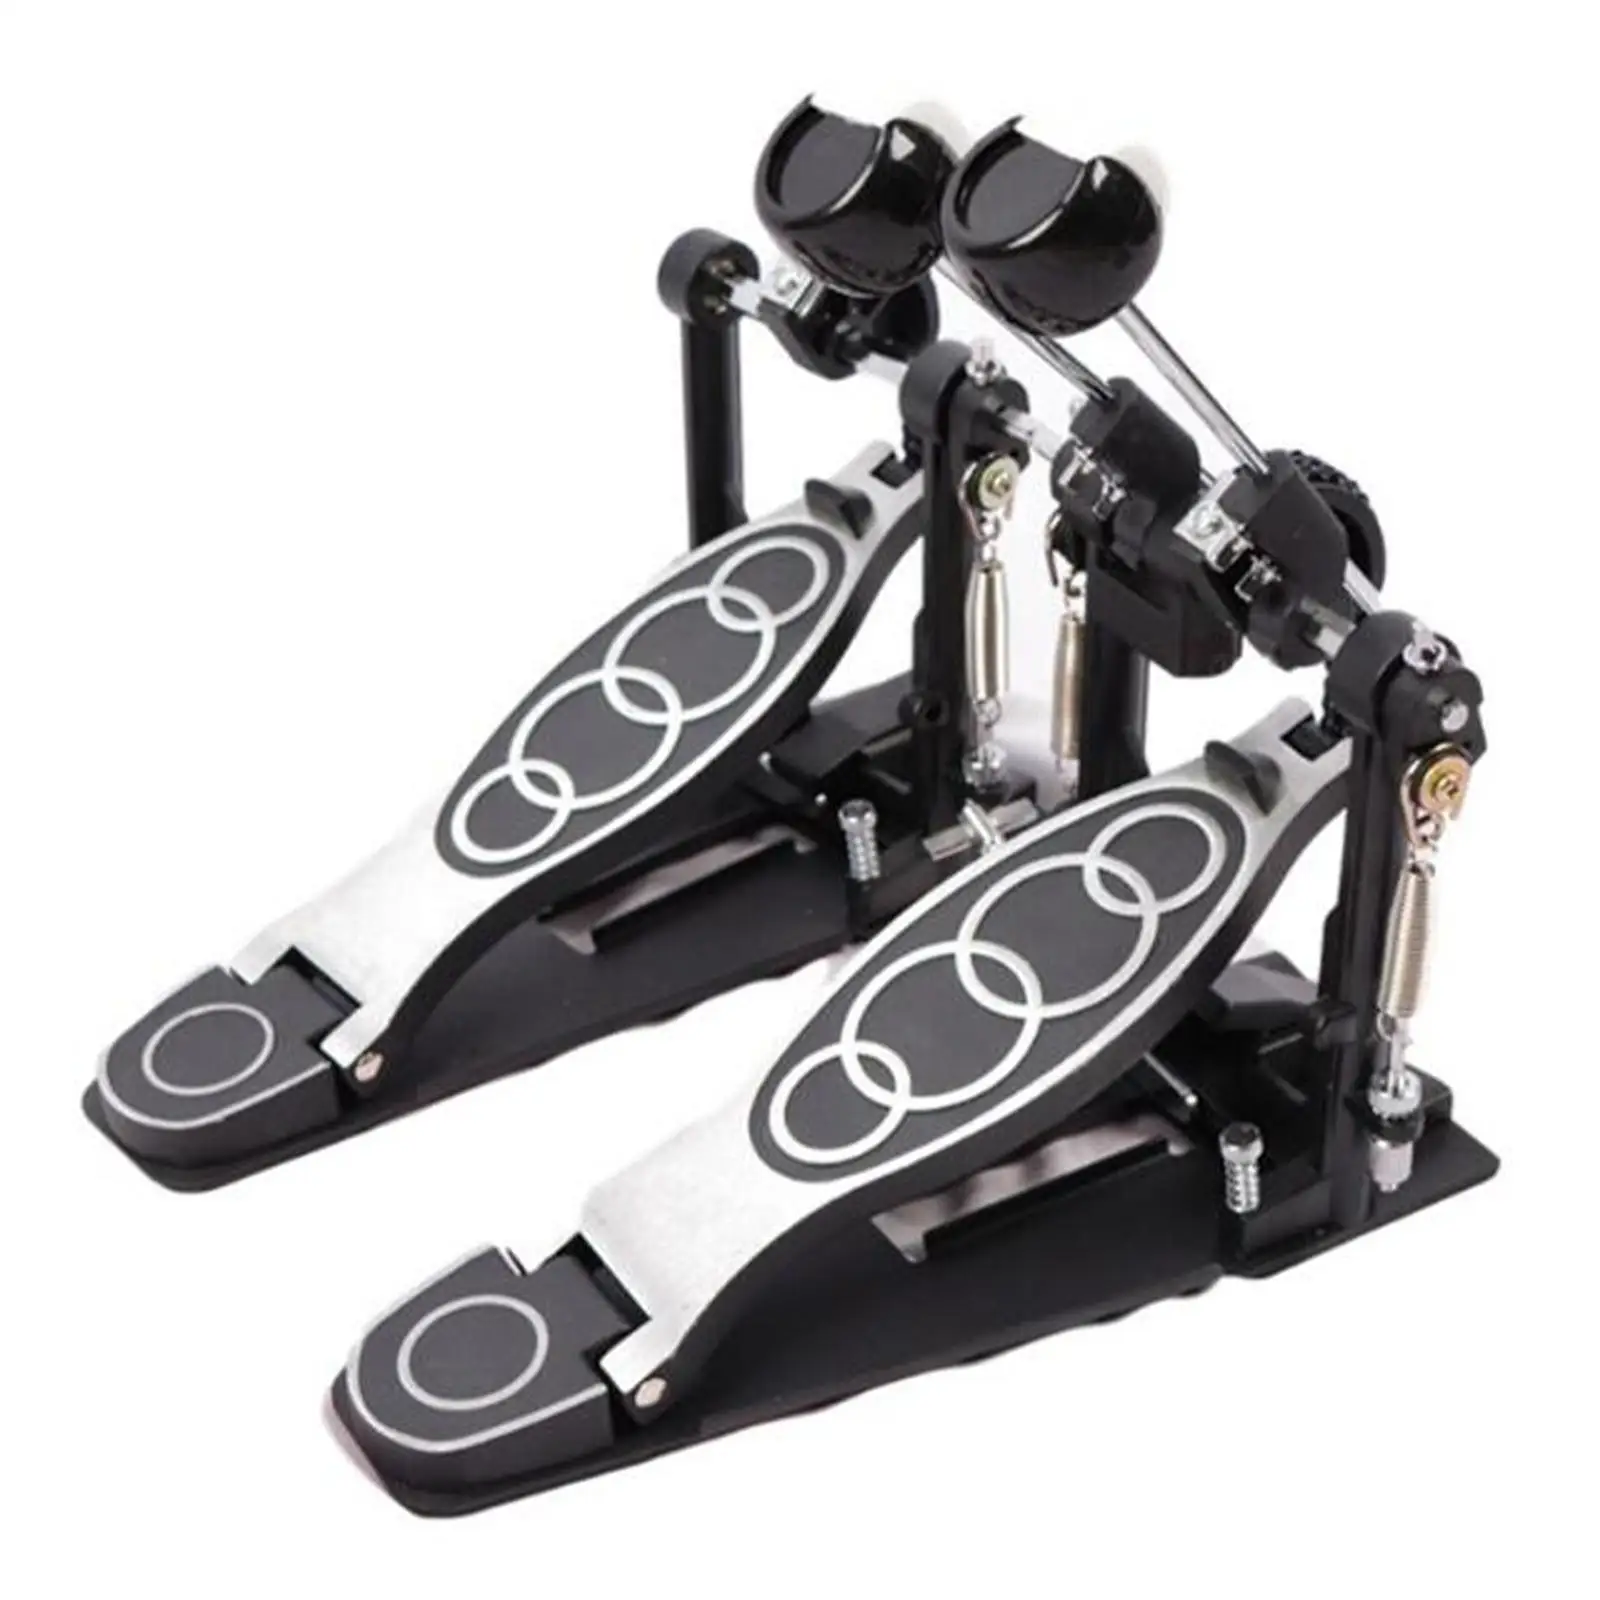 Dual Pedal Two Chain Drive Percussion Hardware Double Bass Pedal for Electronic Drum Lovers Jazz Drums Kick Drum Set Drummers